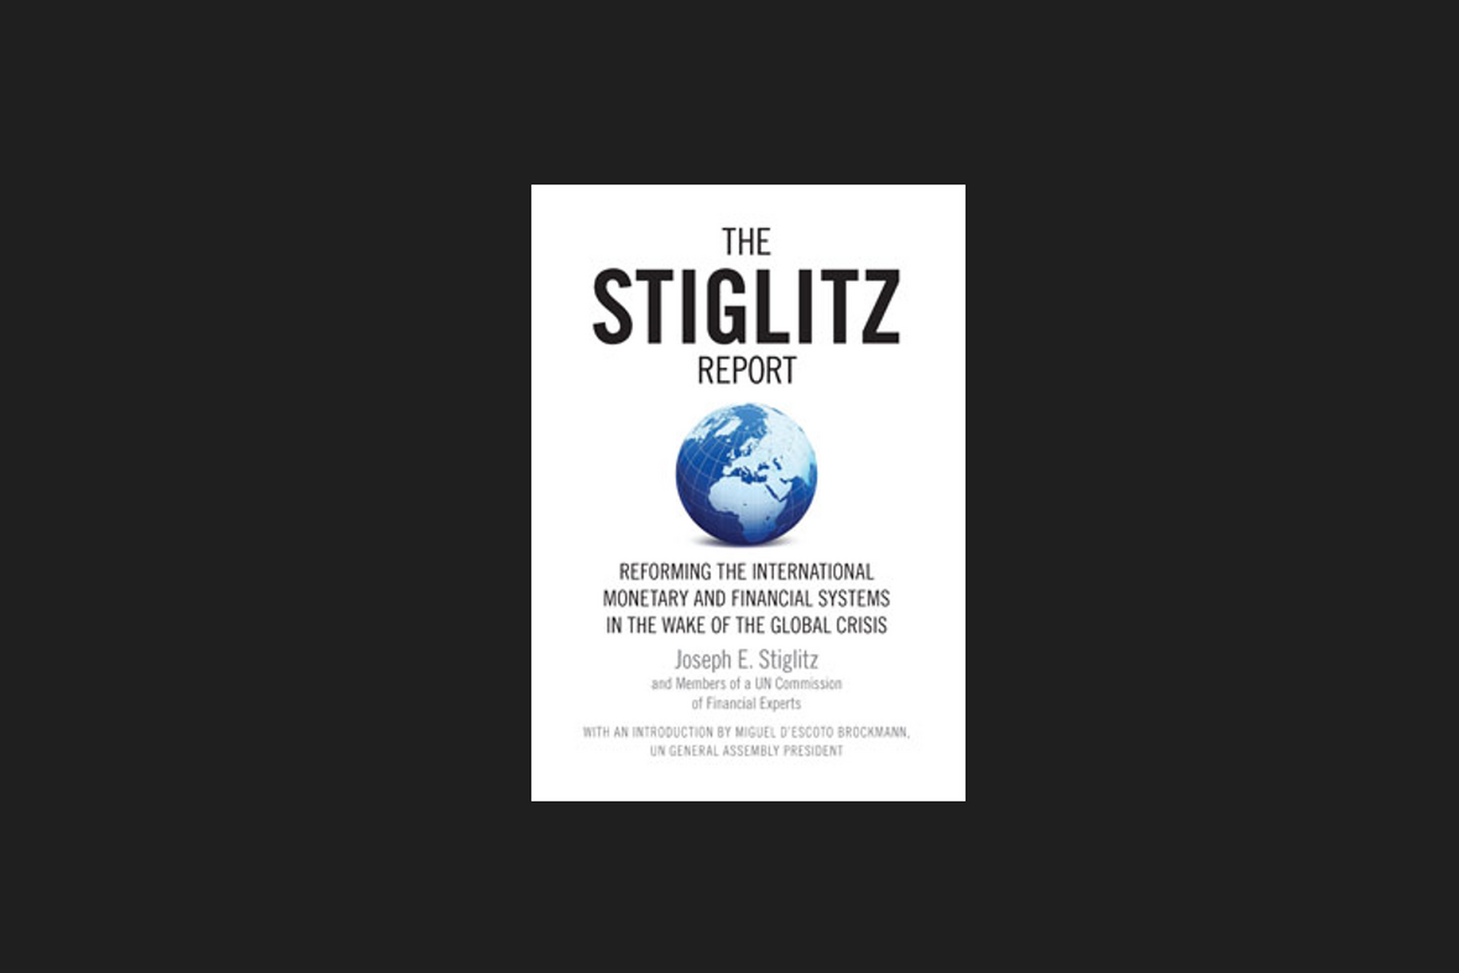 Photo Image of The Stiglitz Report: Reforming the International Monetary and Financial Systems in the Wake of the Global Crisis